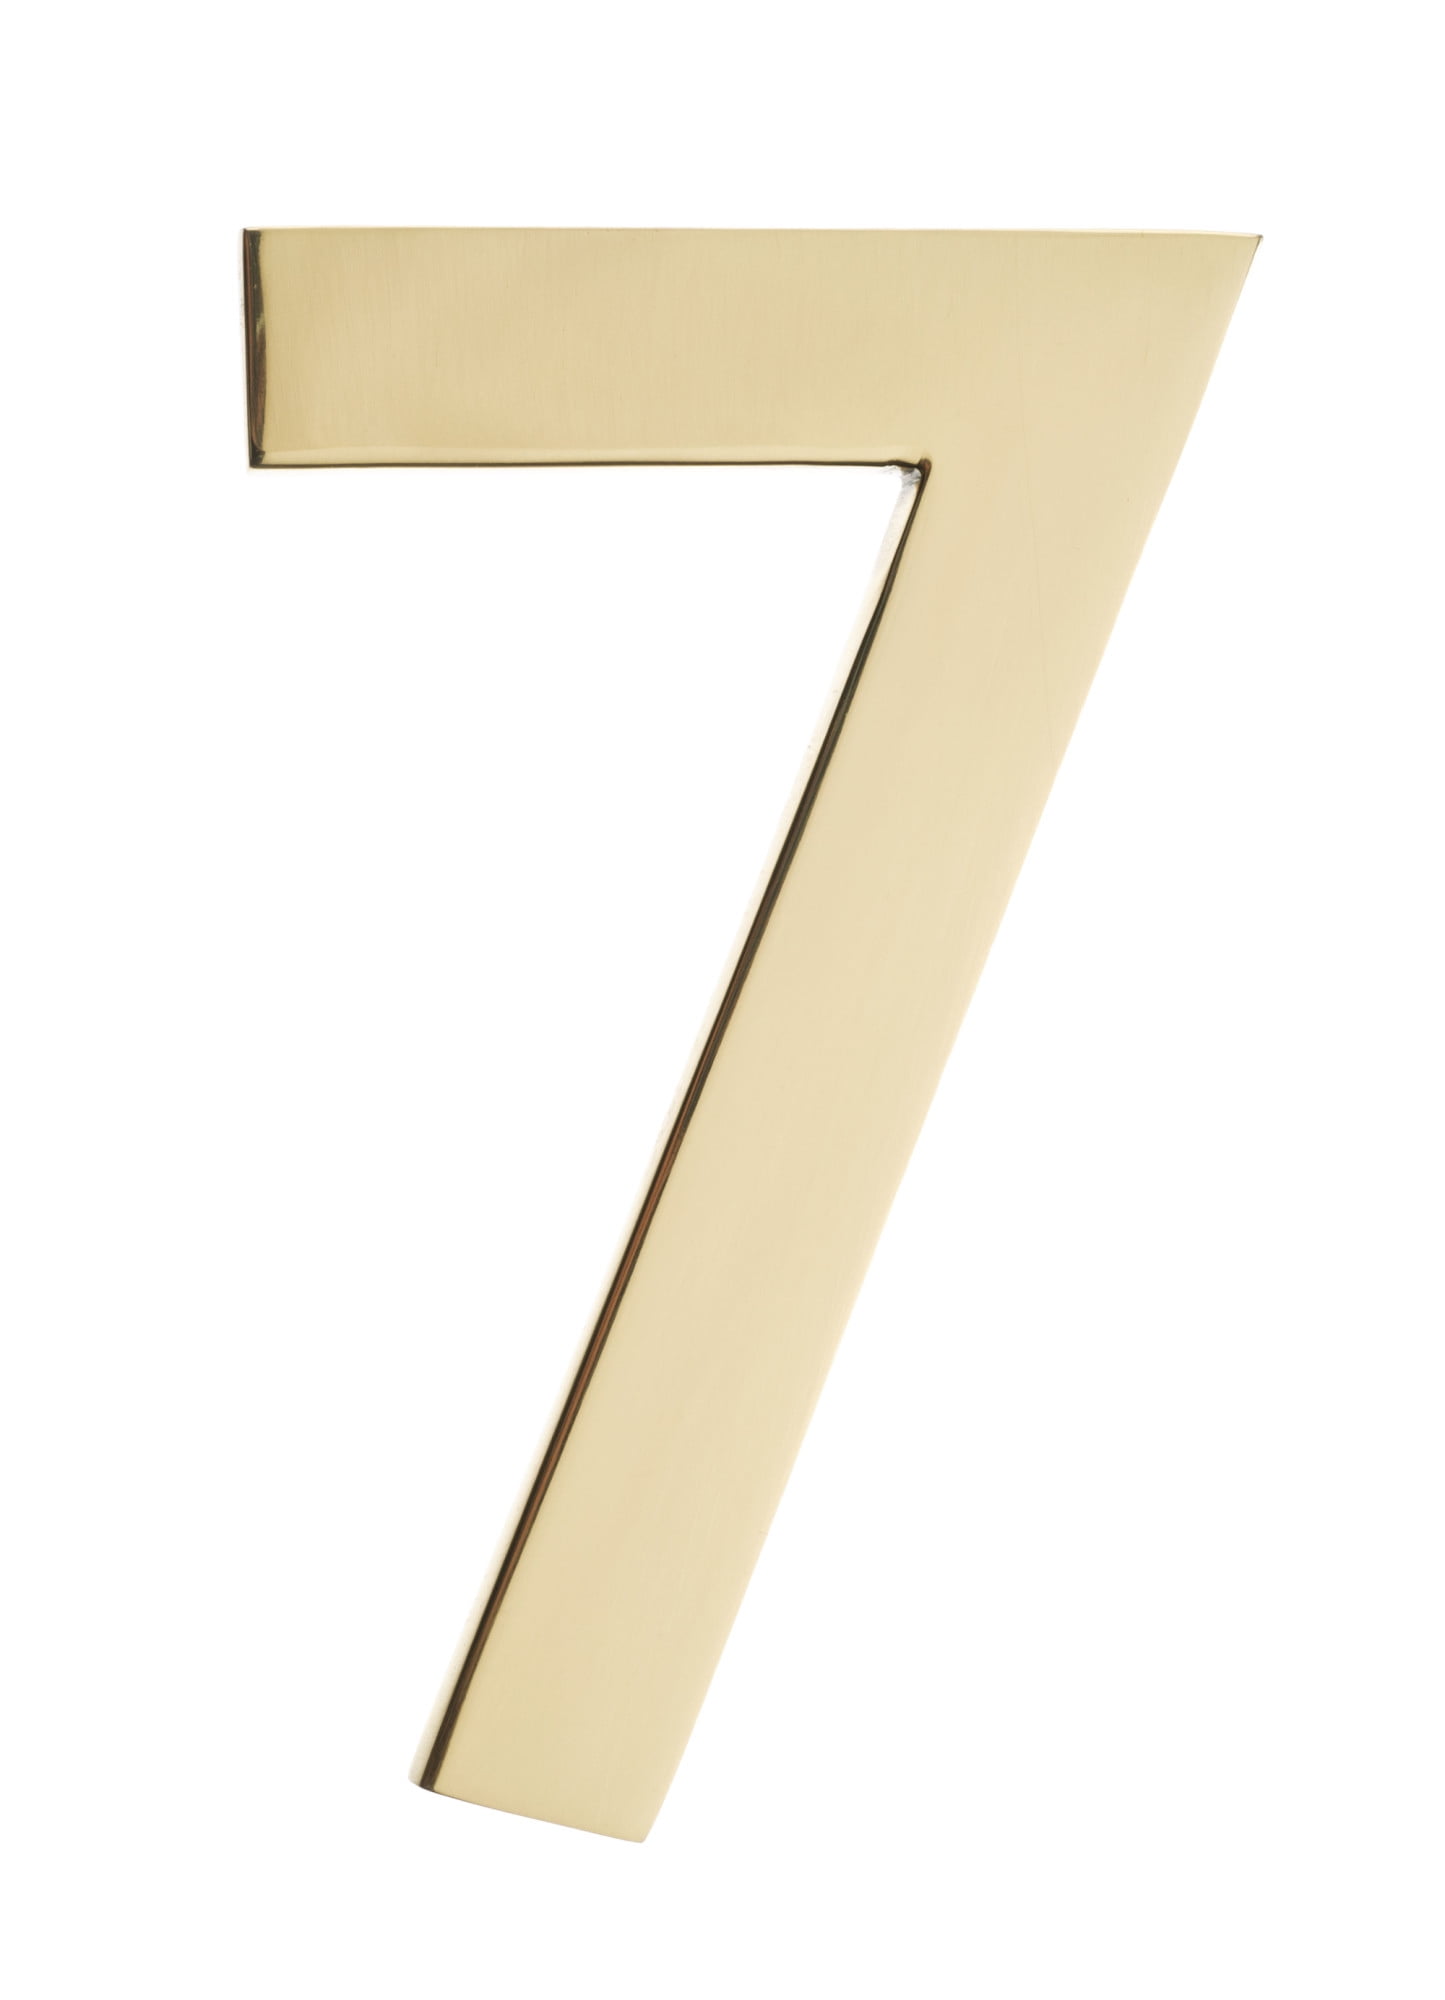 3582pb-7 Floating House Number 7, Polished Brass - 4 In.